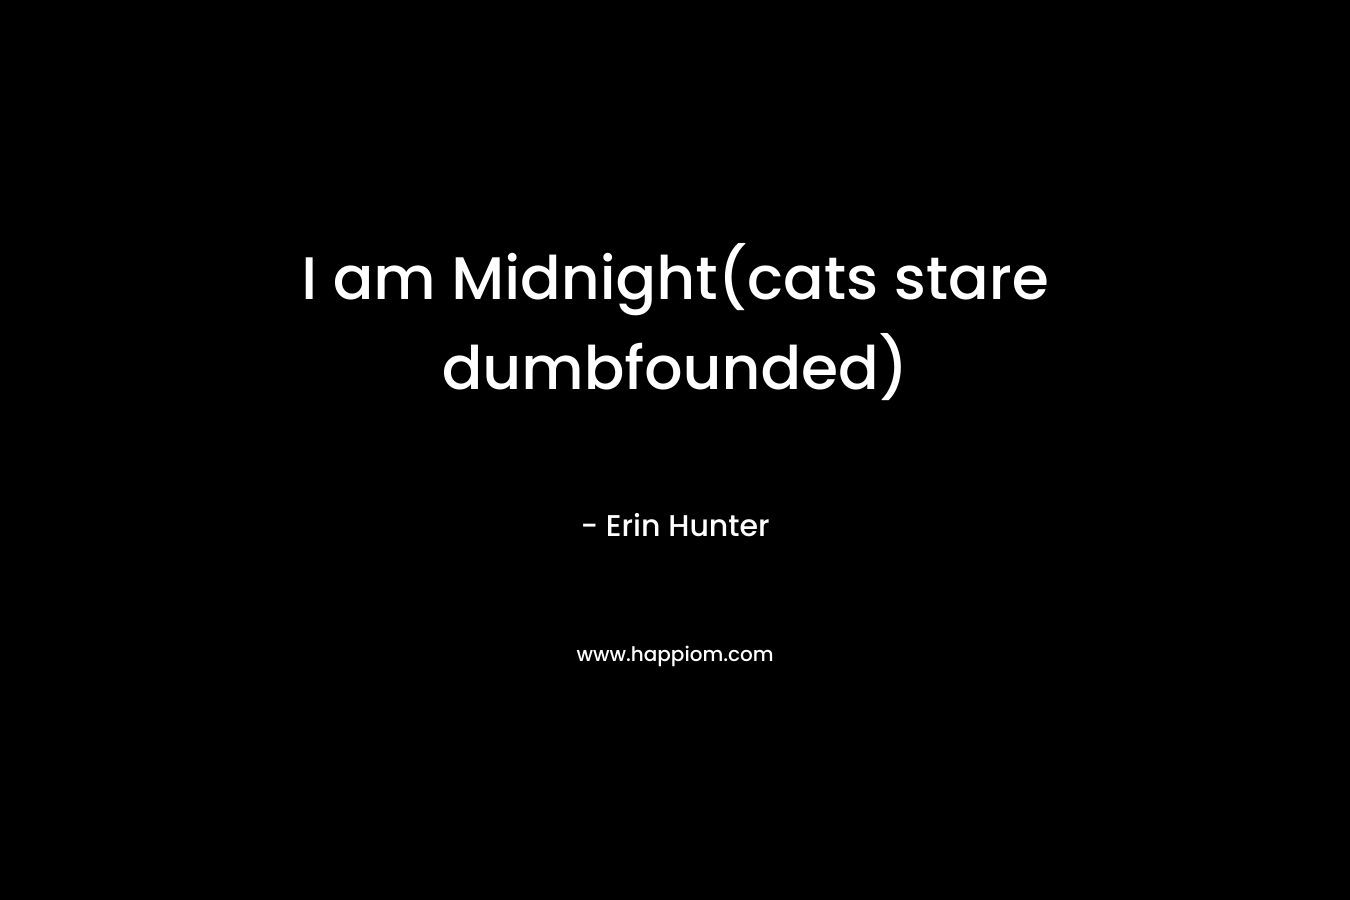 I am Midnight(cats stare dumbfounded)